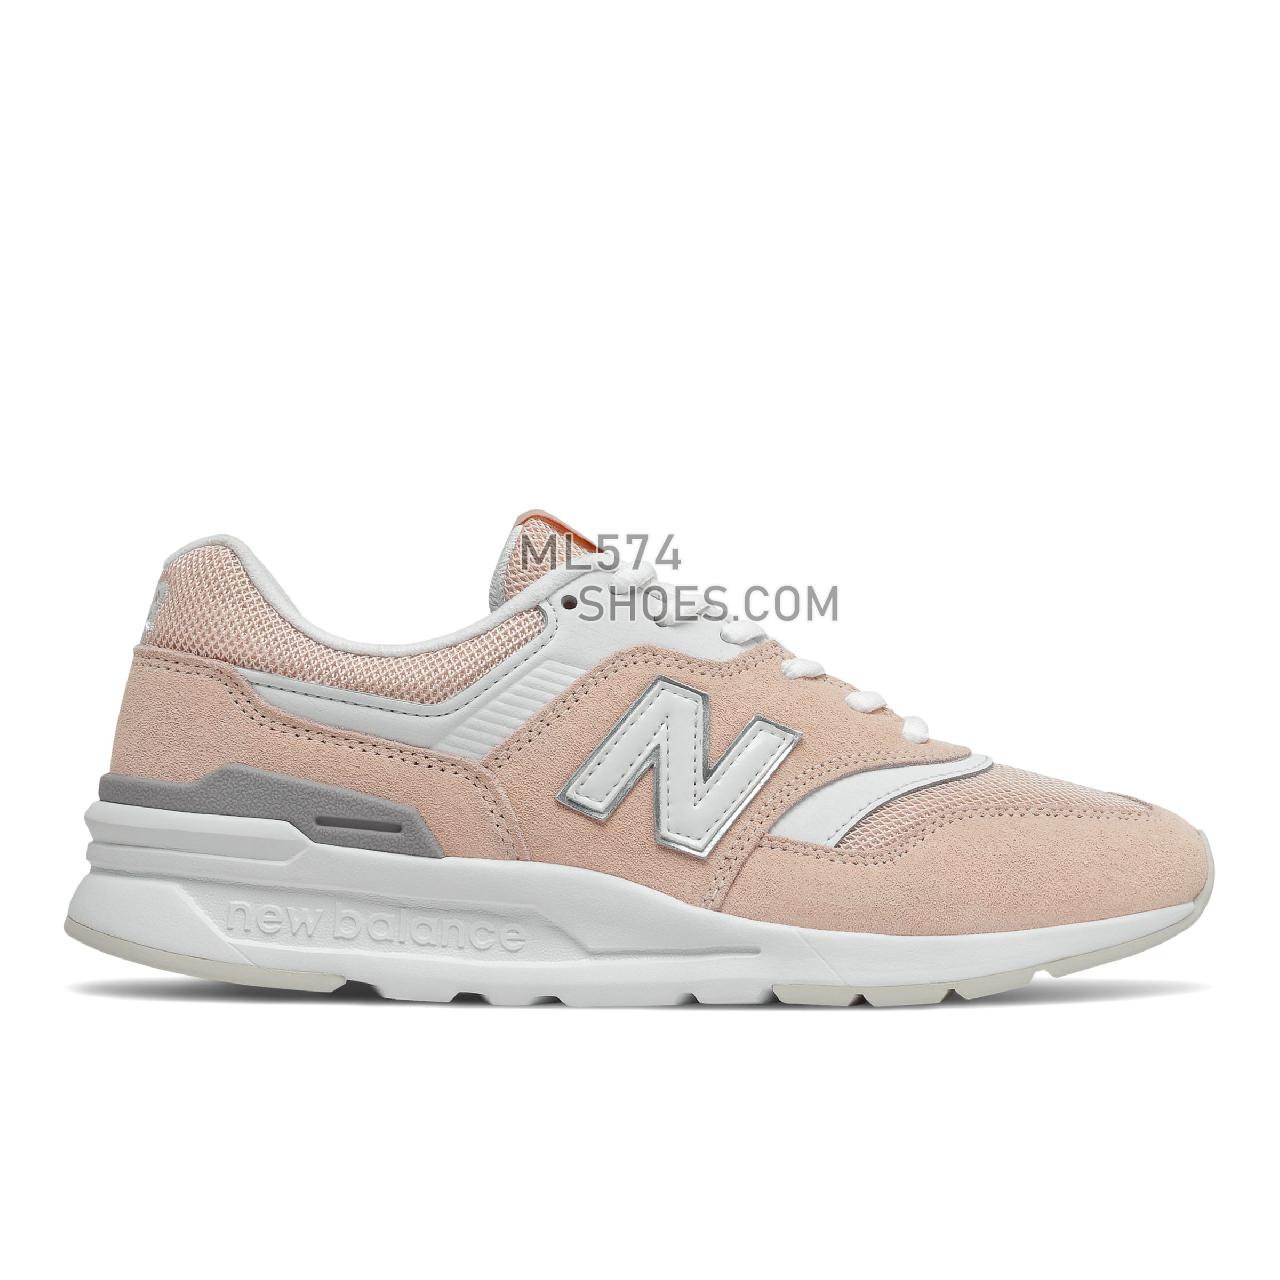 New Balance 997H - Women's Sport Style Sneakers - Rose Water with White - CW997HCK